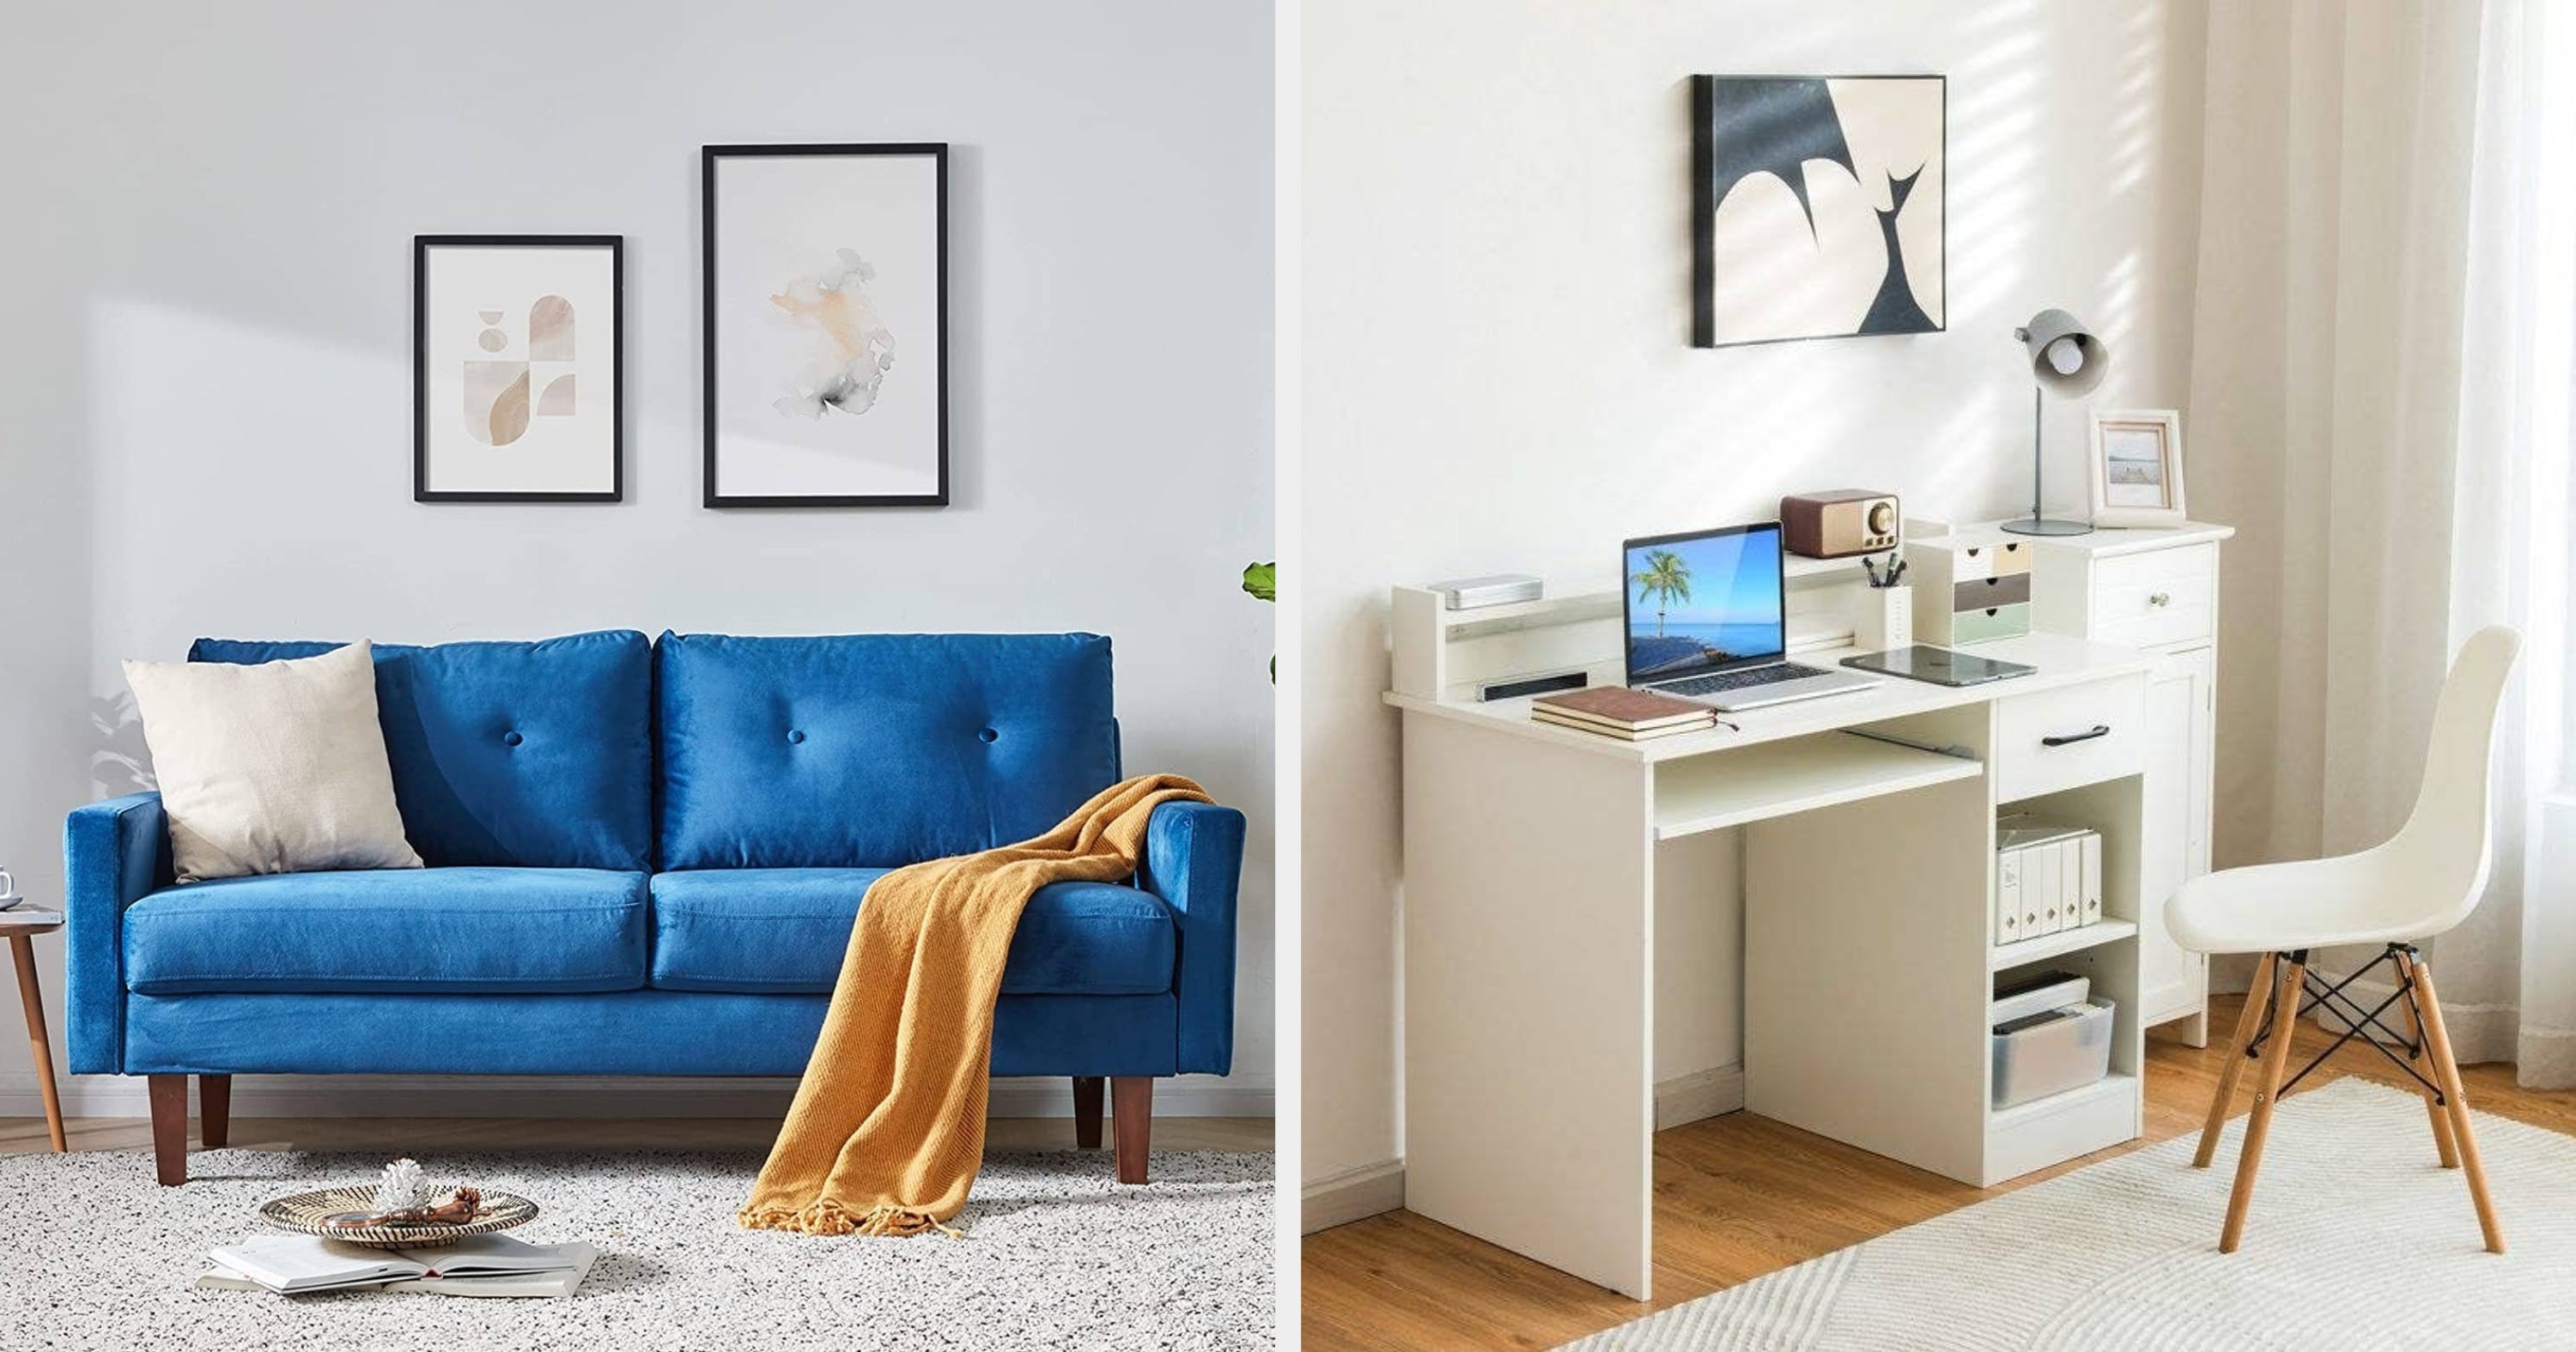 Where to Shop for Affordable Furniture (Instead of IKEA)